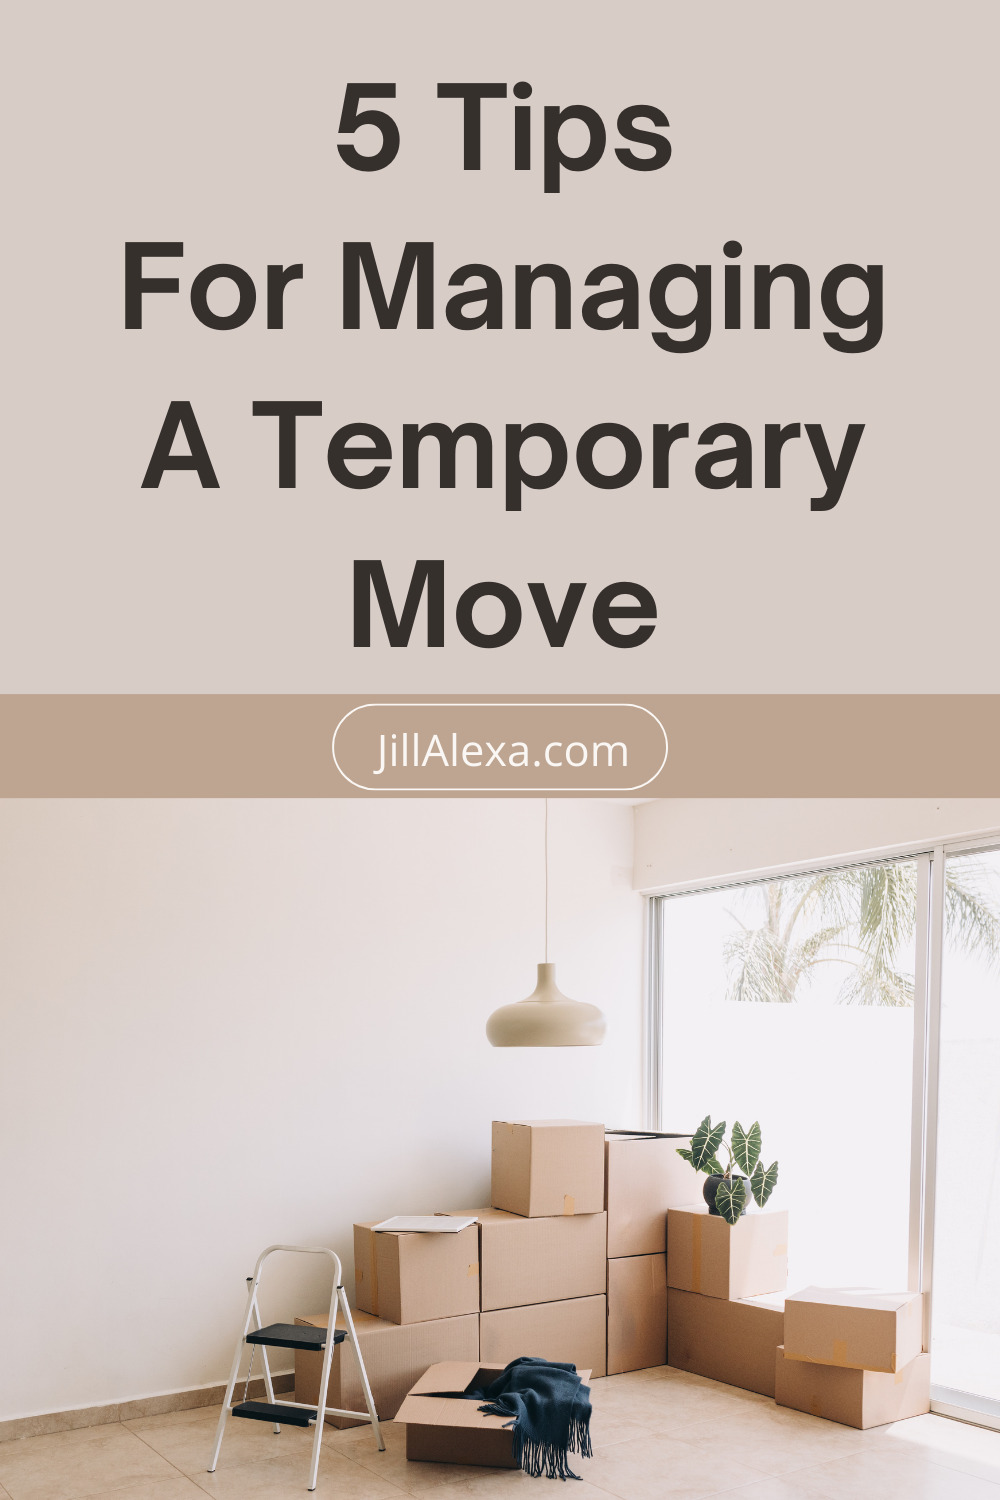 5 Tips For Managing A Temporary Move